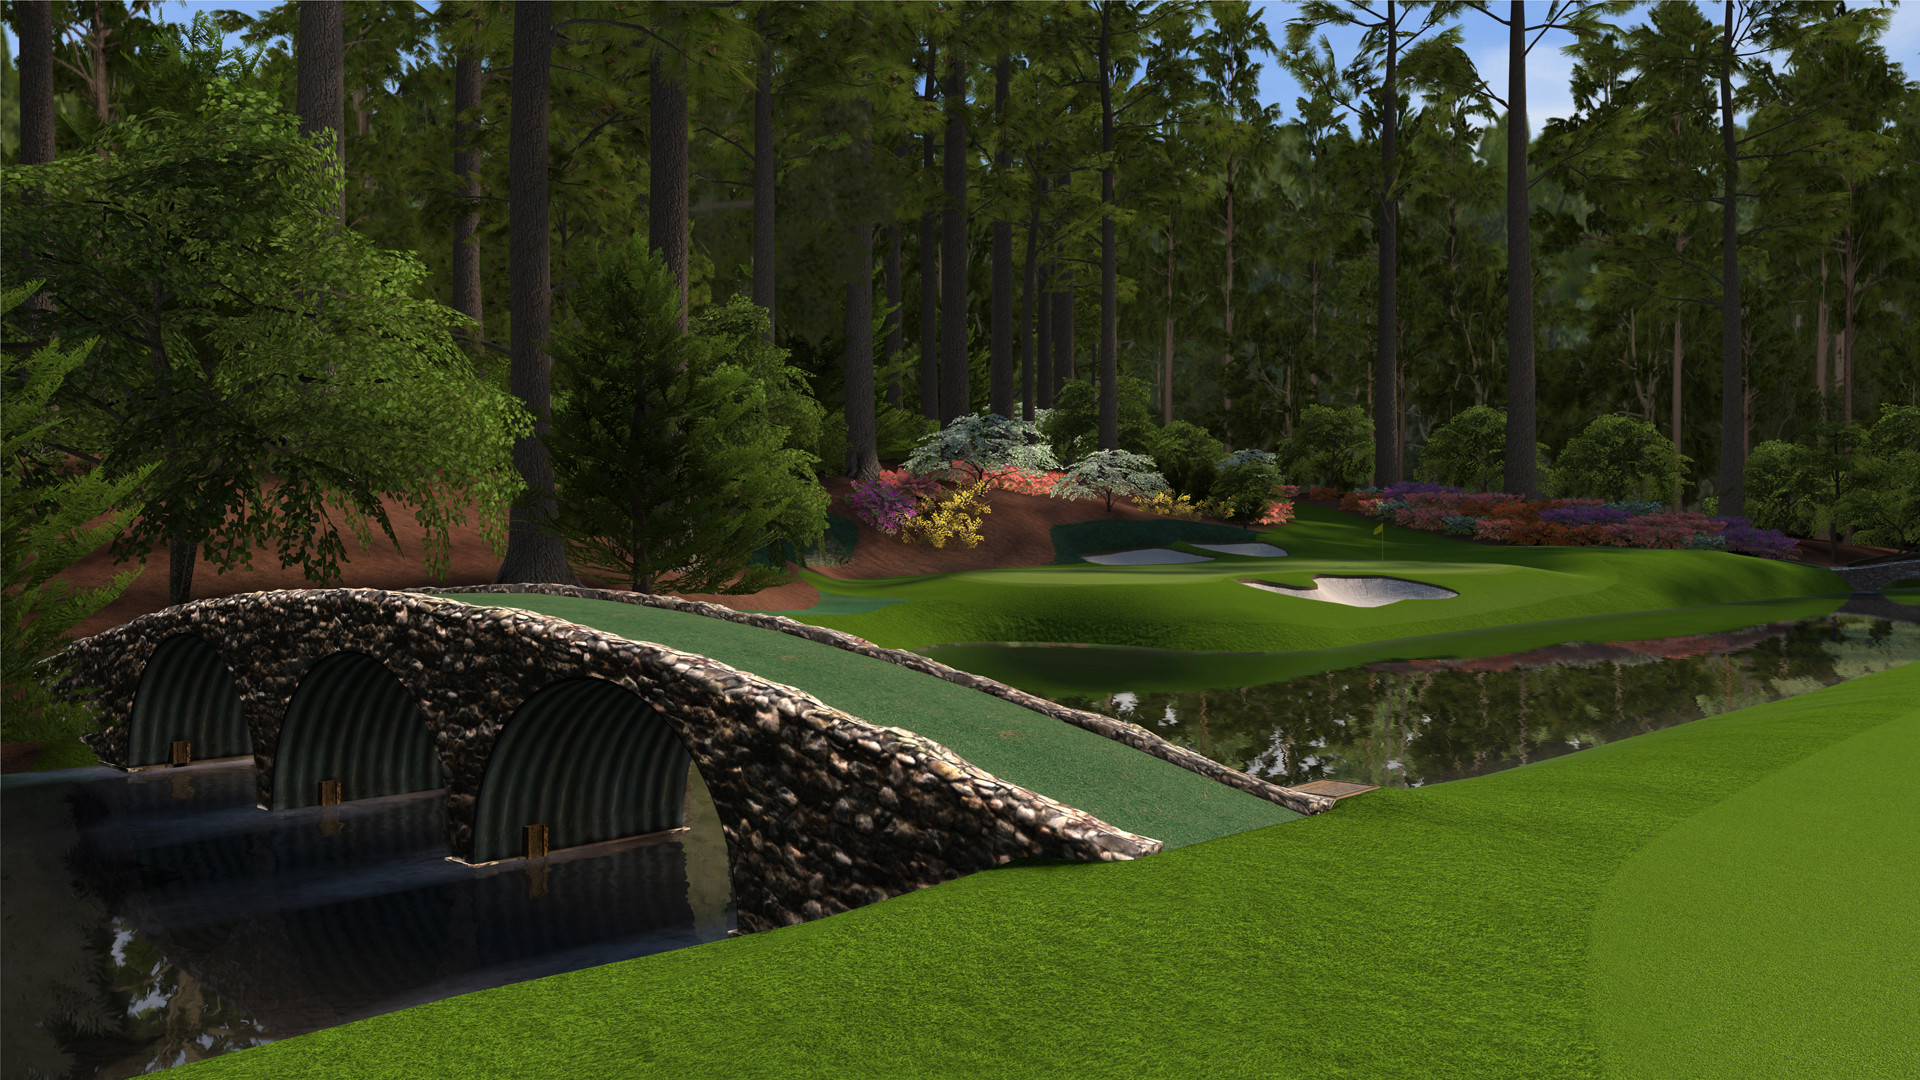 1920x1080 augusta hole 12 570x320 Review: Tiger Woods PGA Tour 12: The .